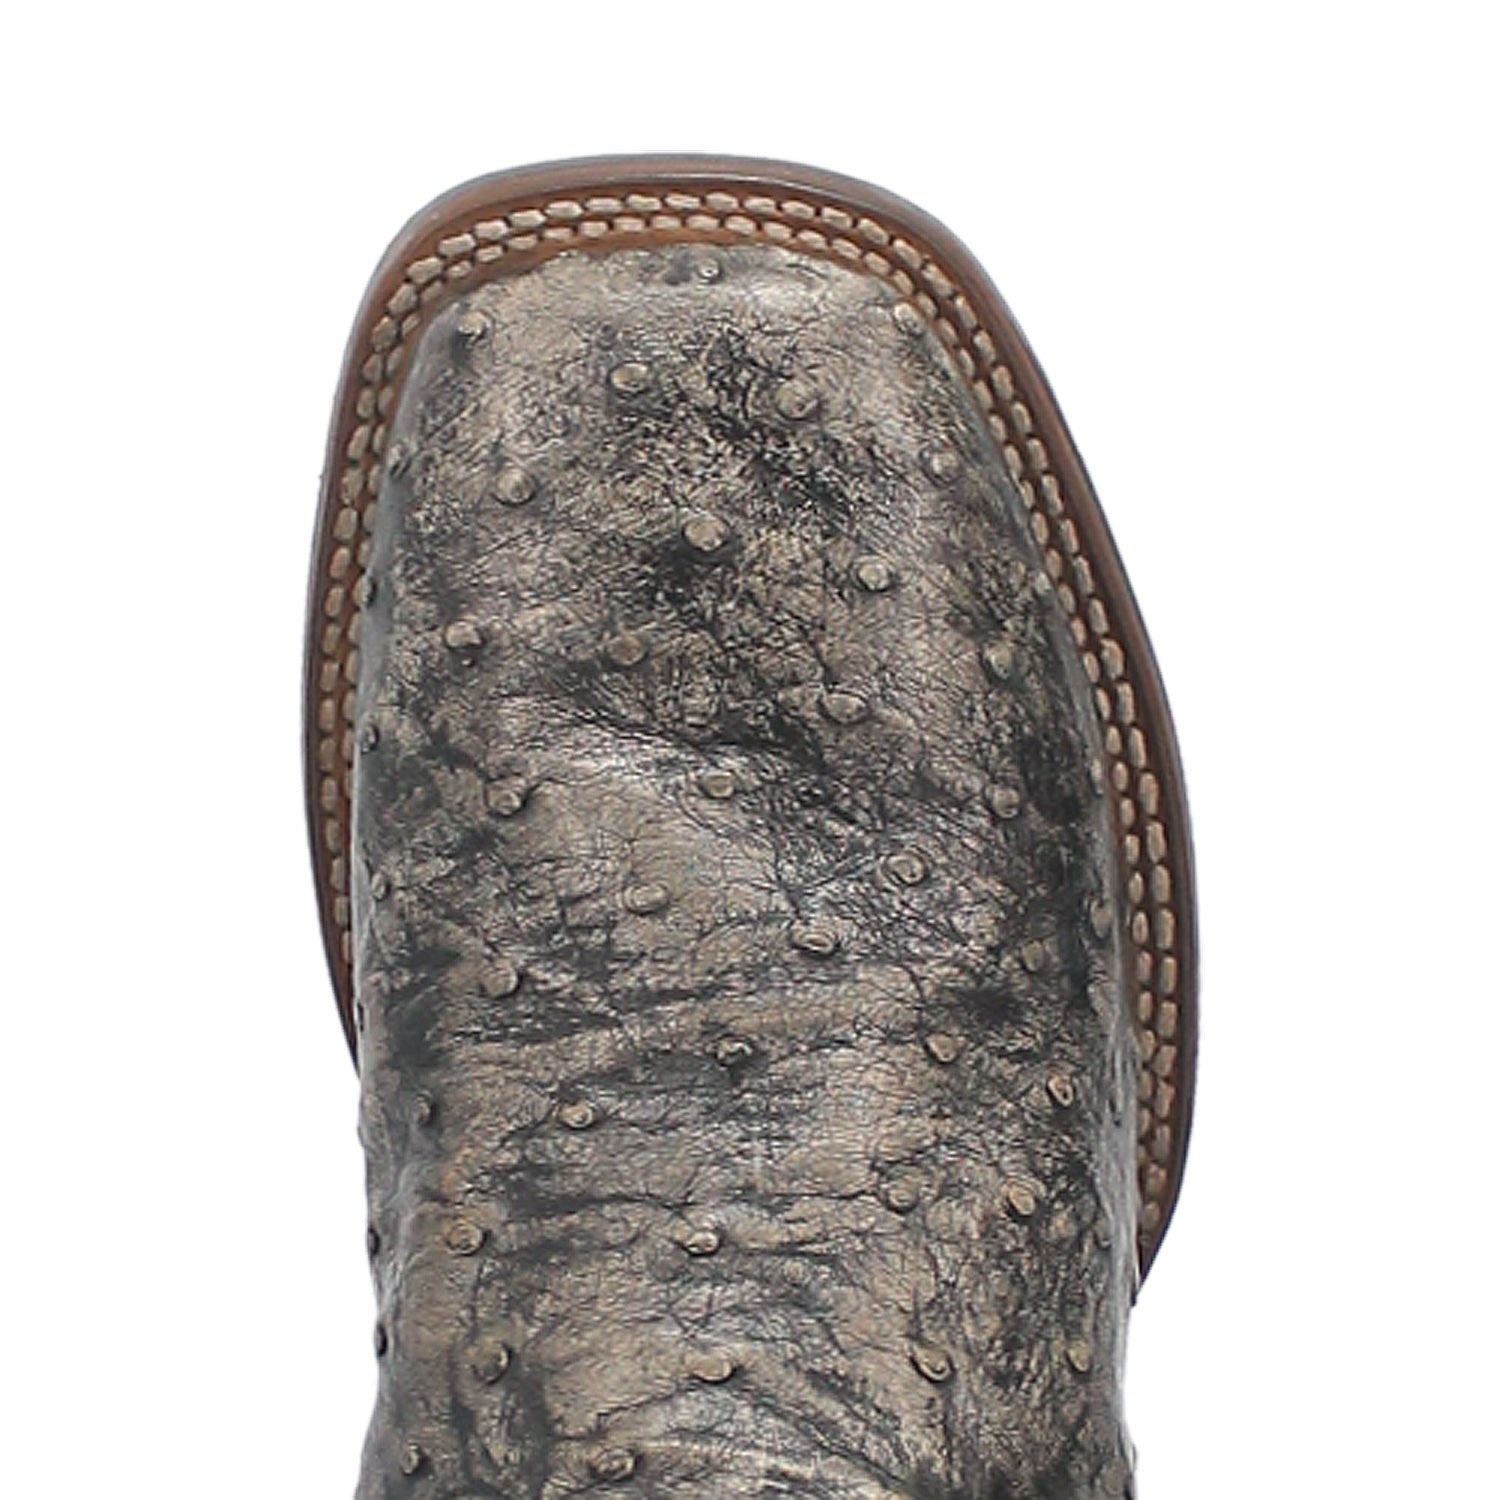 DILLINGER FULL QUILL OSTRICH BOOT Image